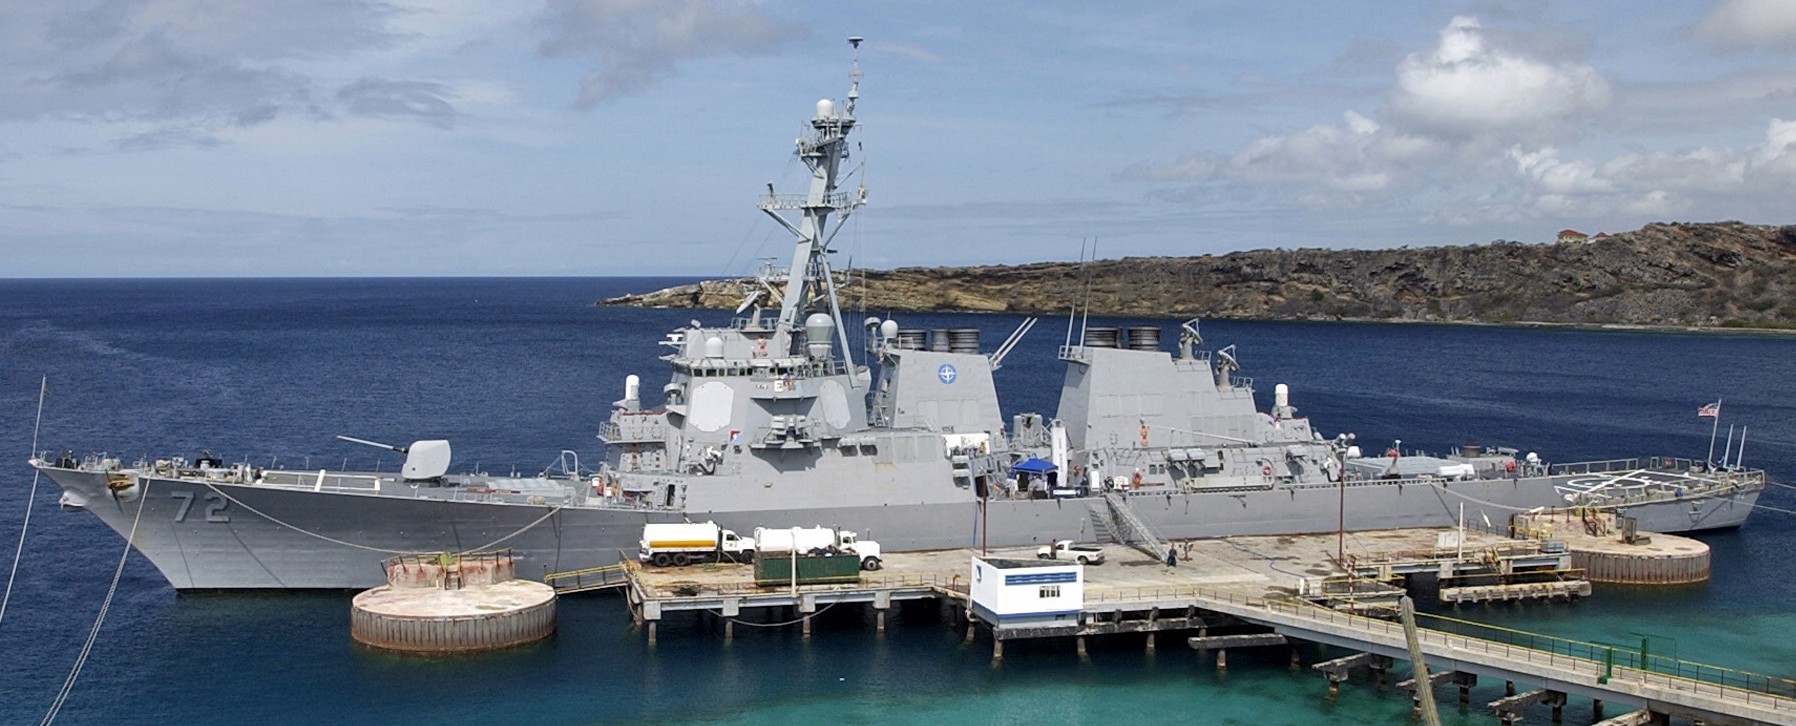 ddg-72 uss mahan guided missile destroyer arleigh burke class aegis bmd 36 curacao antilles